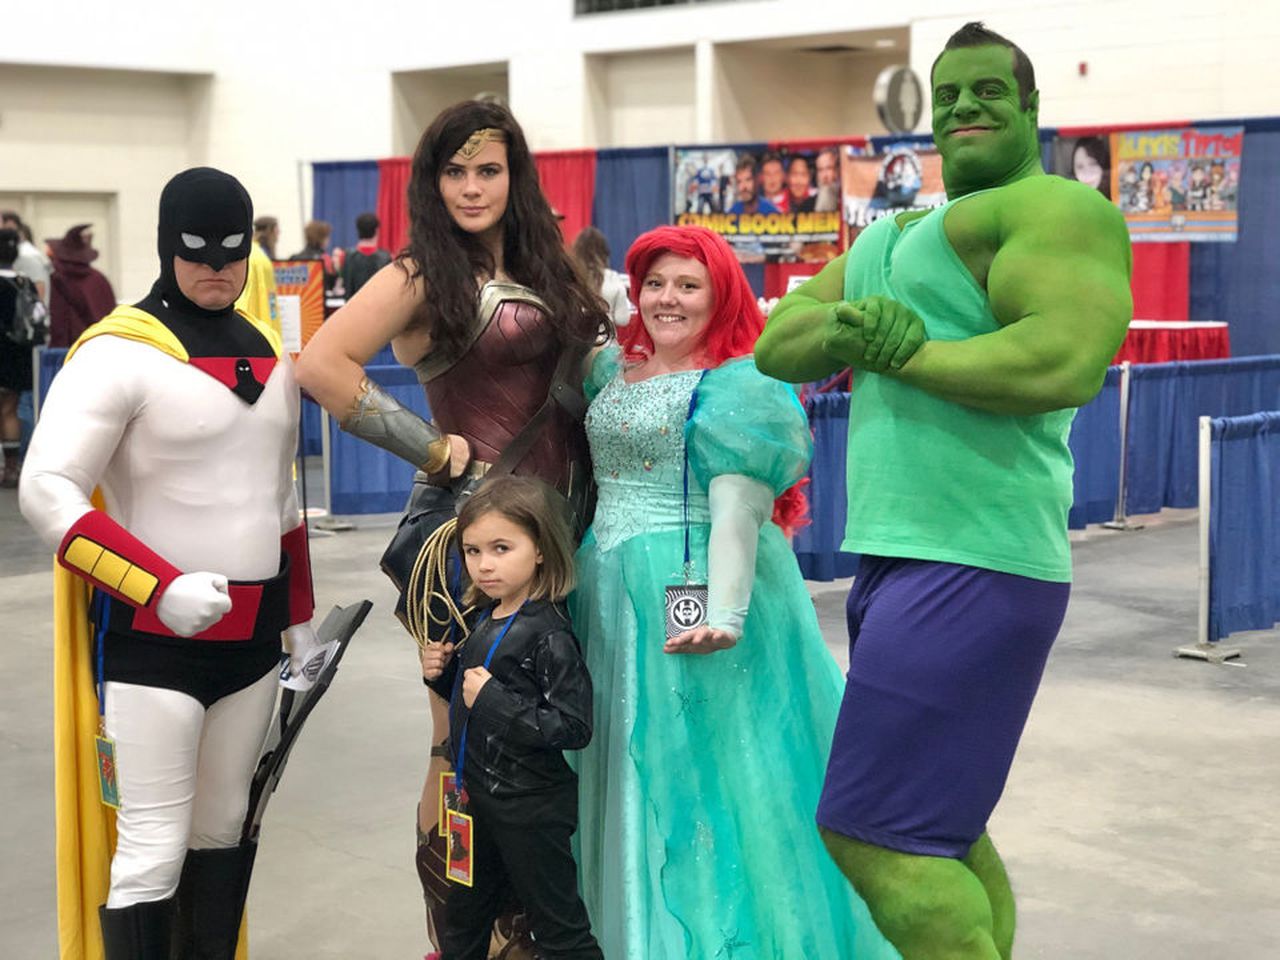 Midland Mall Comic Con and Dinosaurs invites families for playful fun